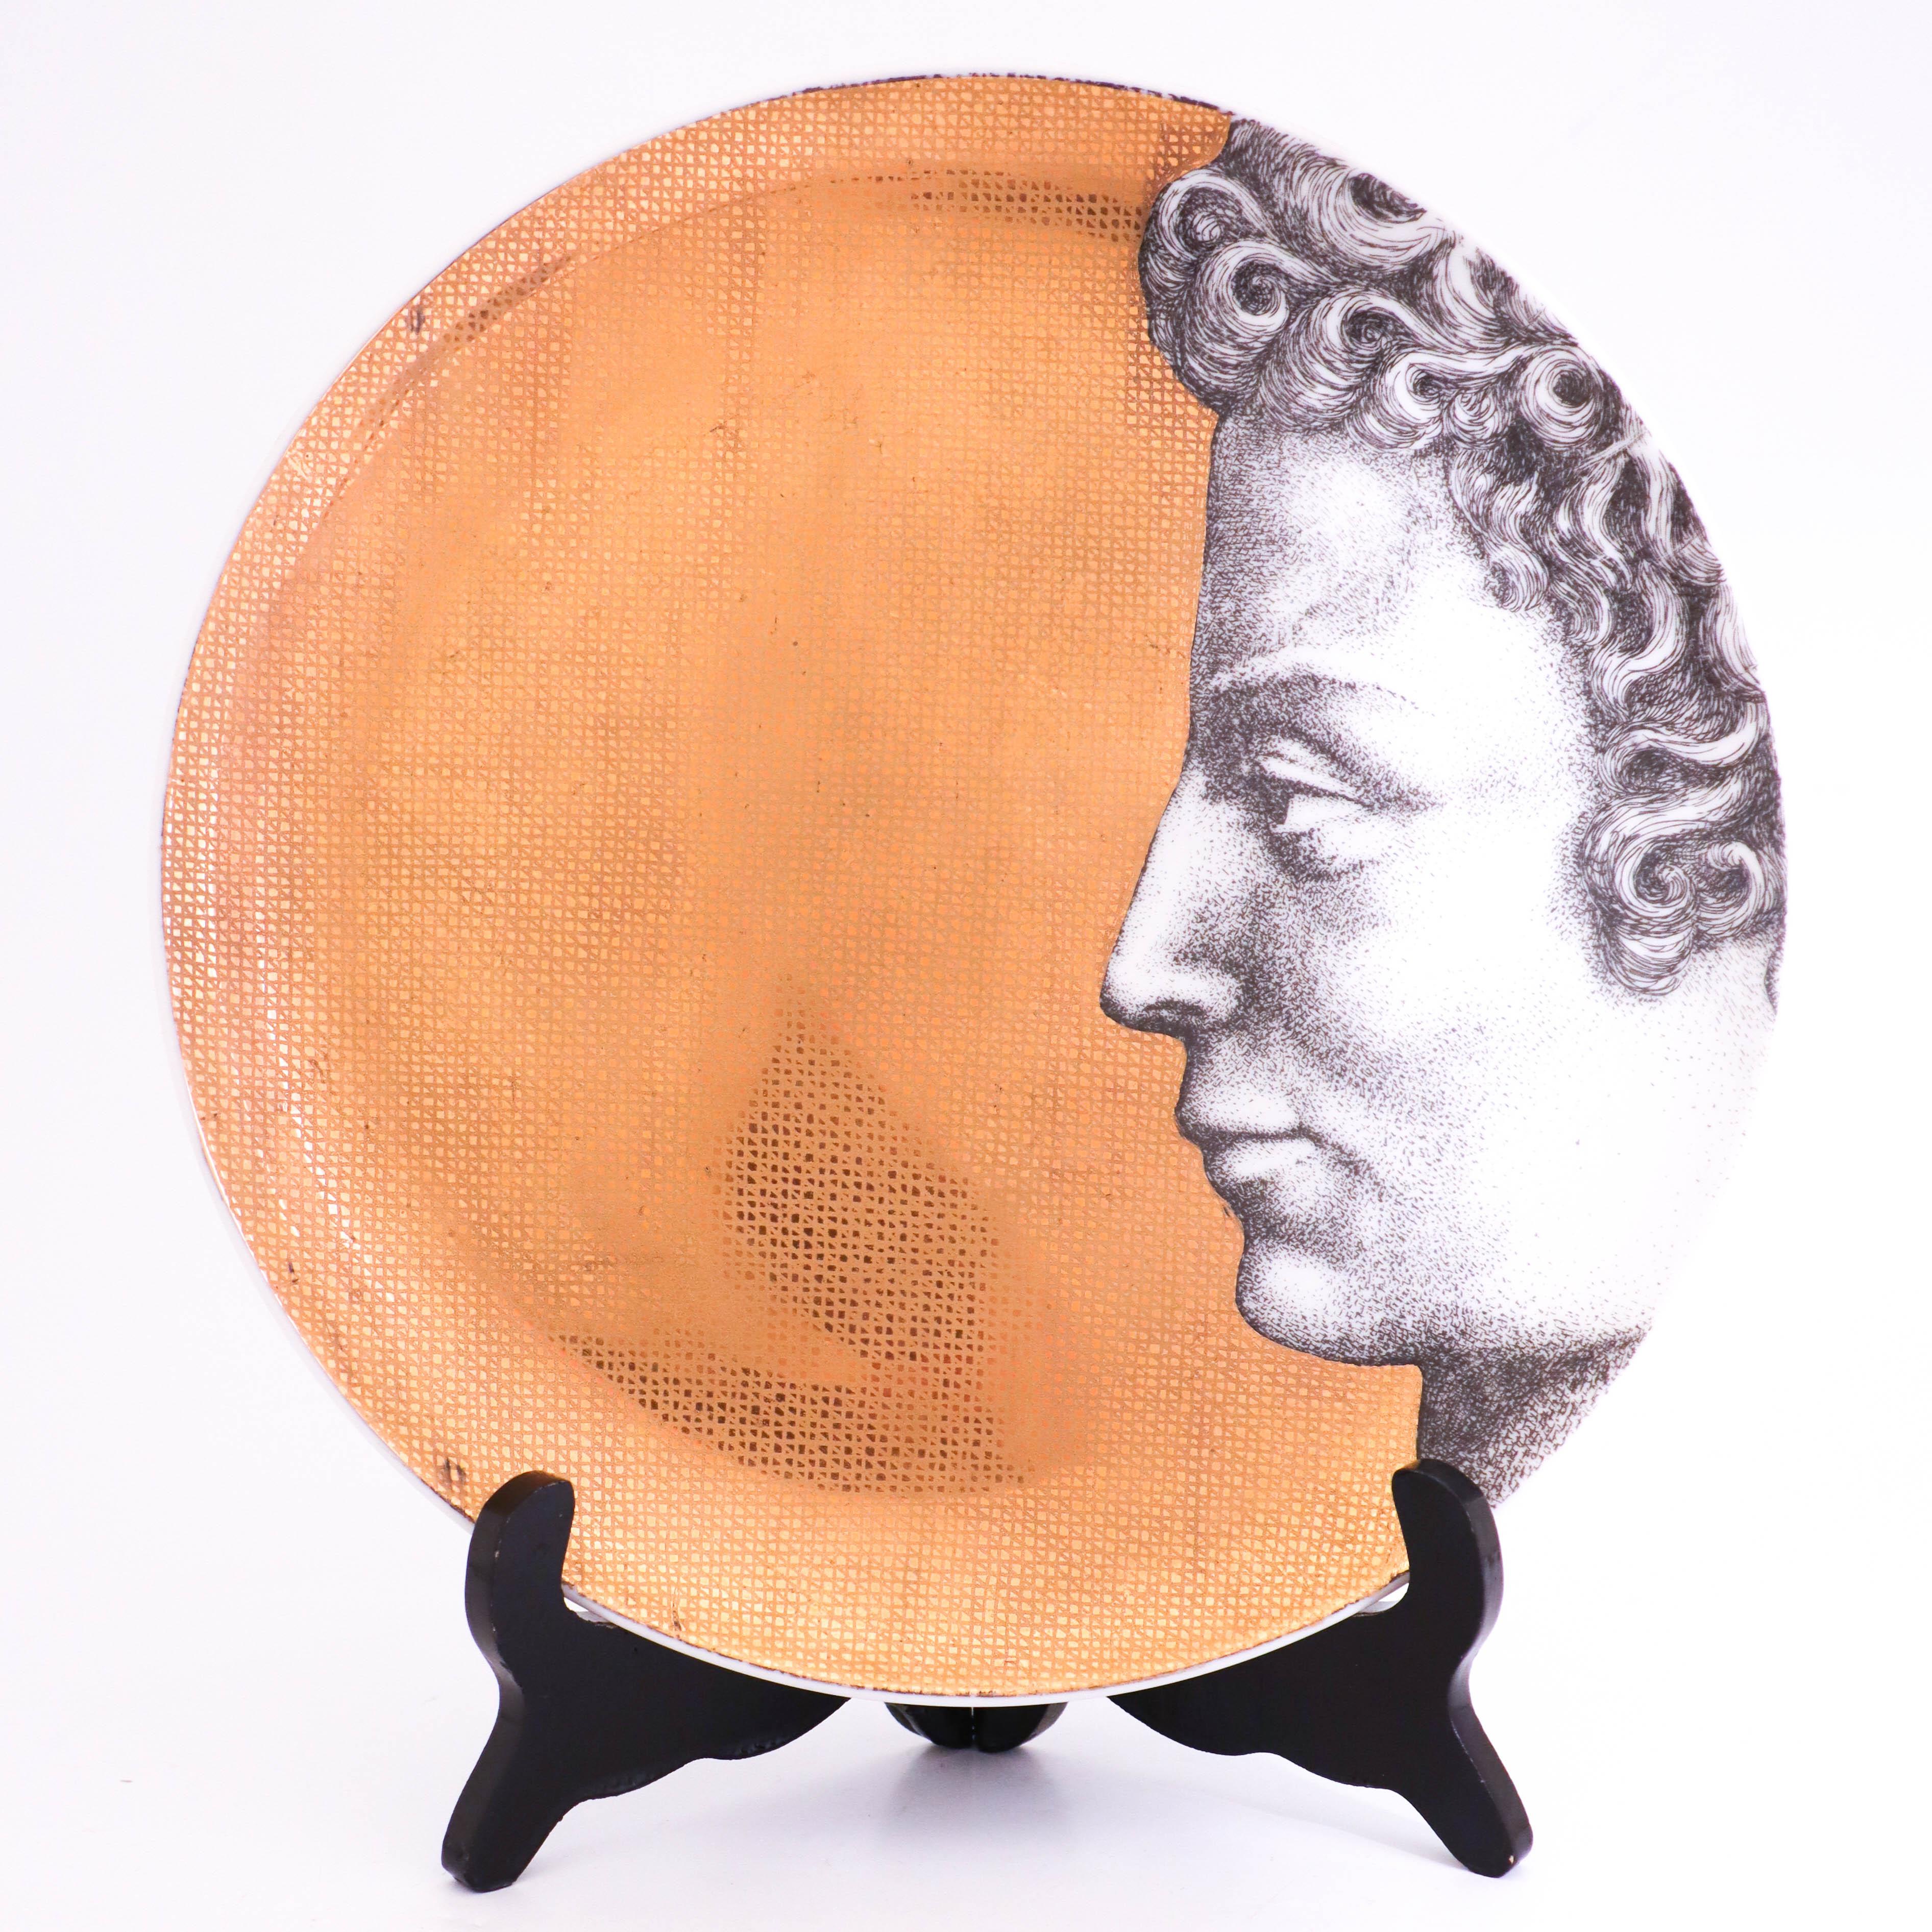 12 plates of model Adamo (Adam) designed by Piero Fornasetti in the 1950s. Piero Fornasetti created one set of Adam and one set of Eva containing 12 plates each. These plates are 26 cm in diameter and in very good condition, there might appear a few